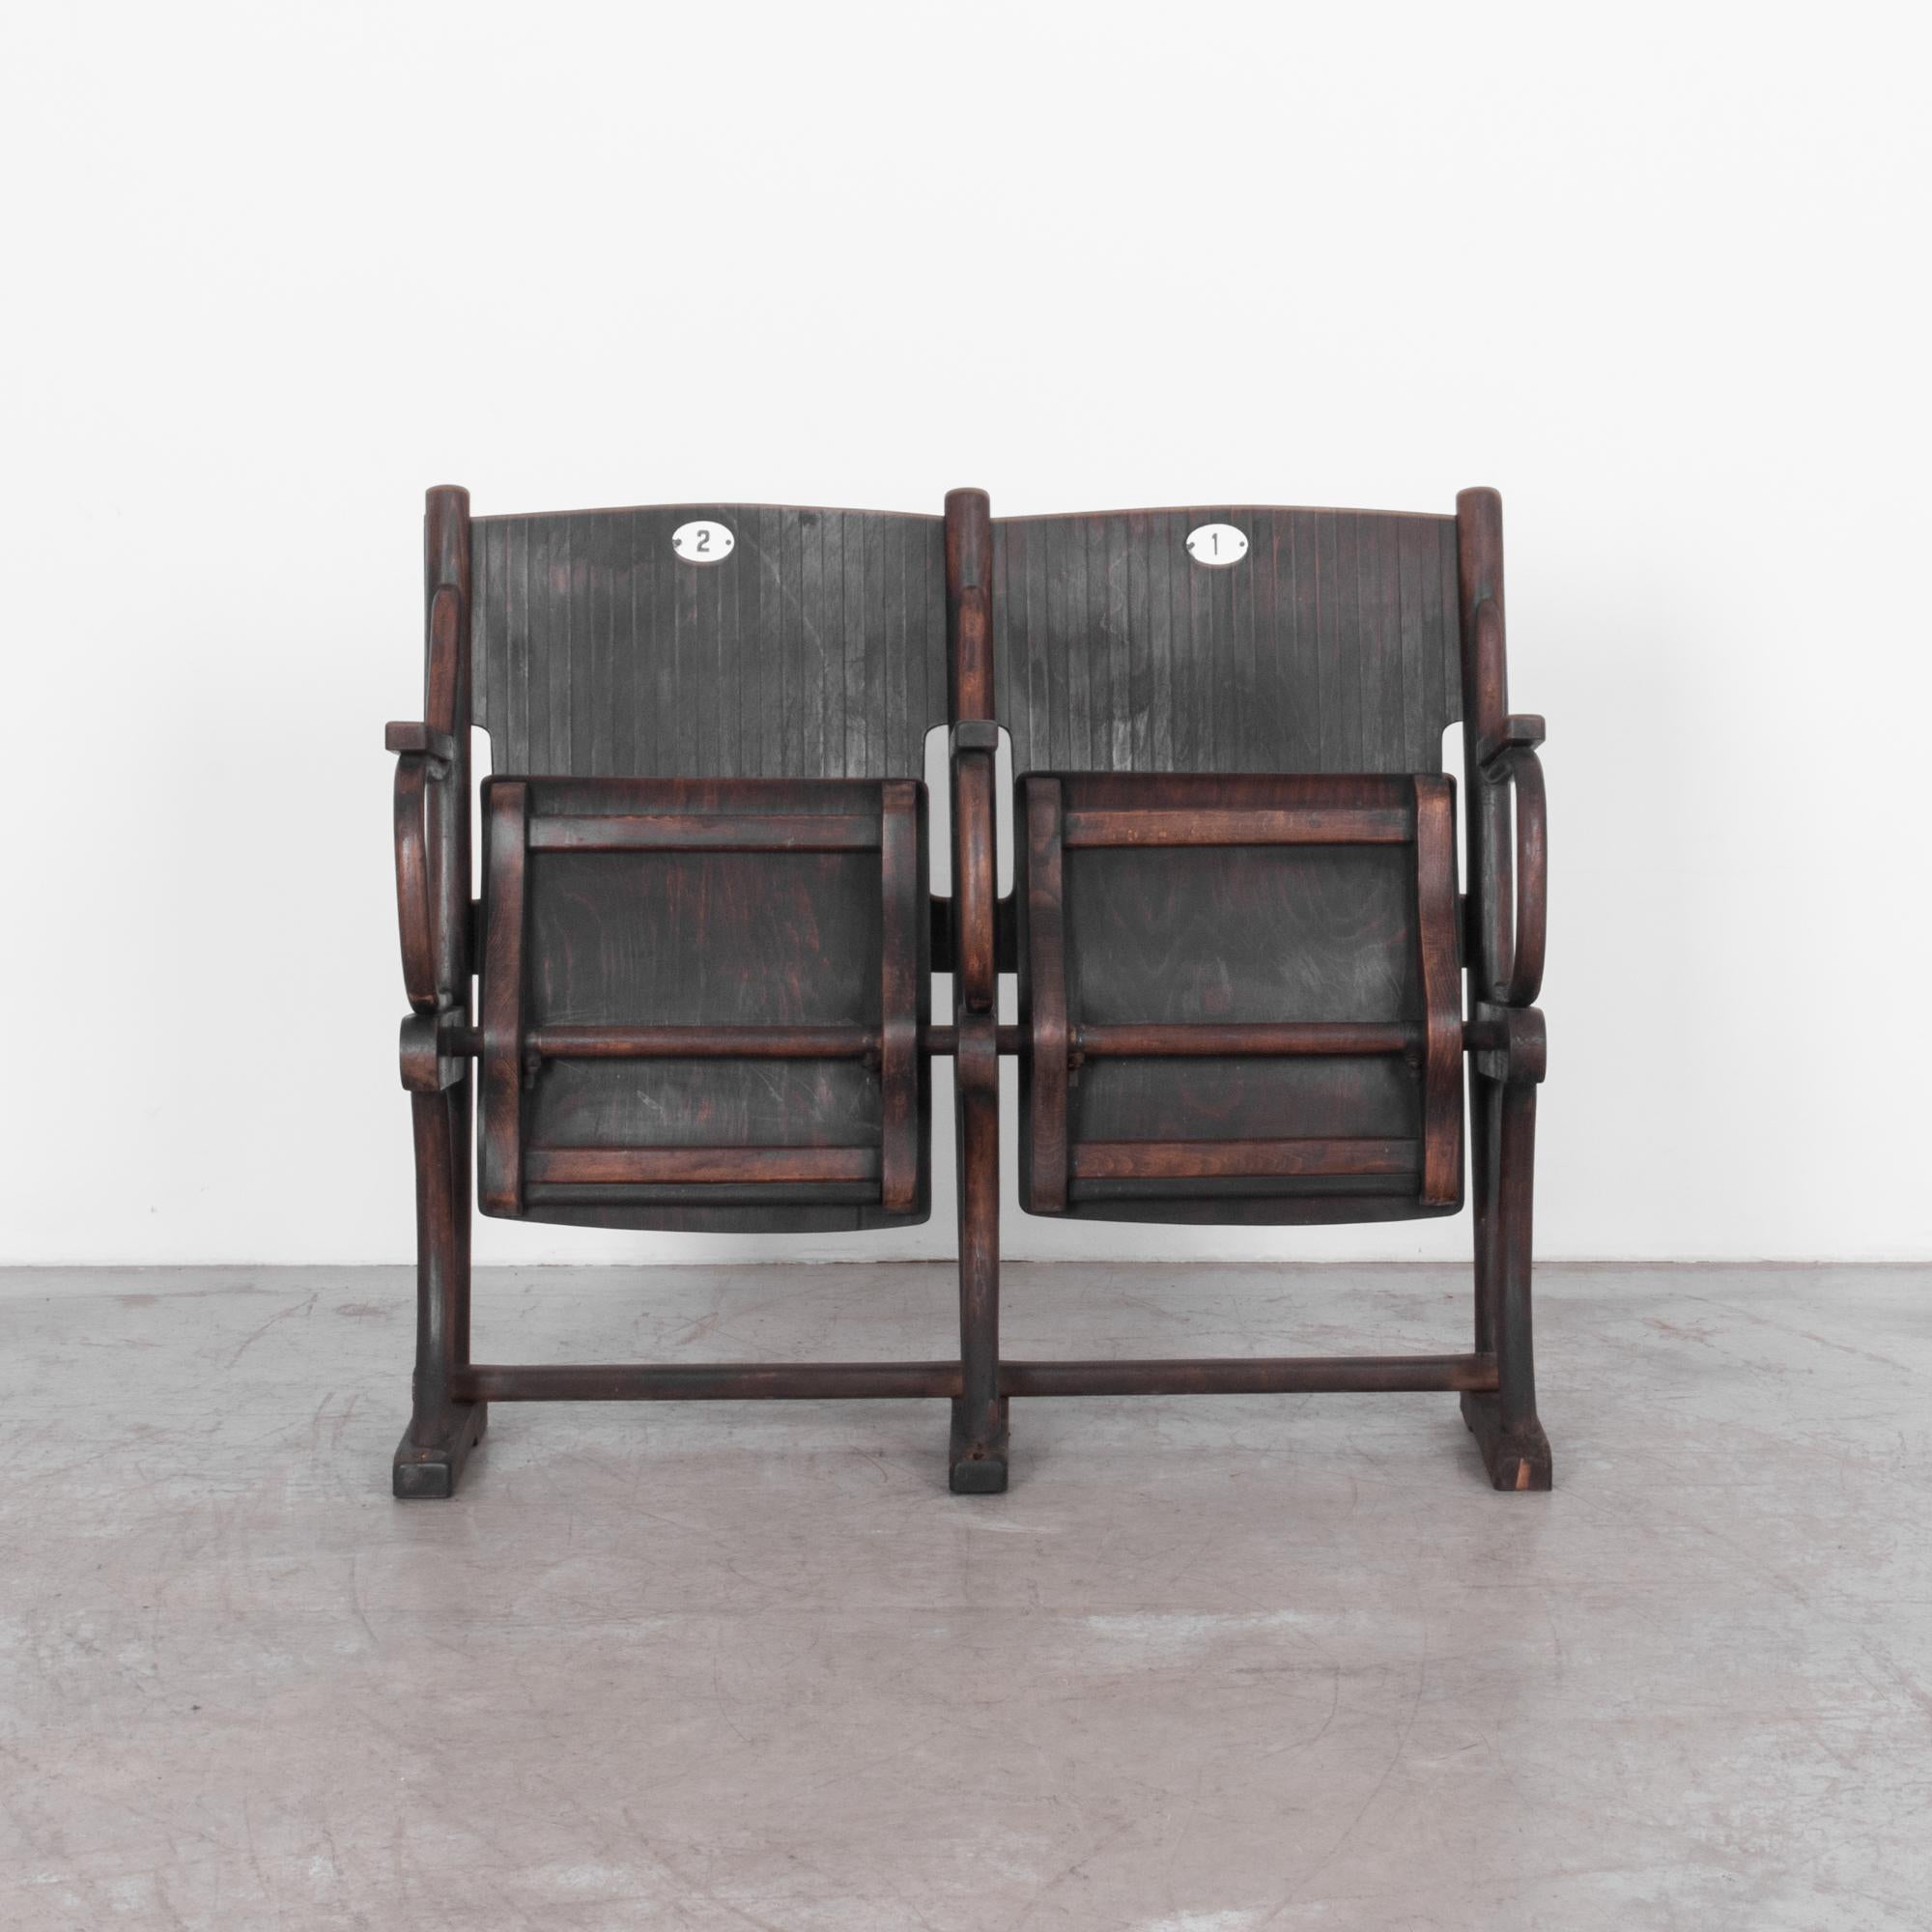 Introducing a rare find for the connoisseur of vintage charm: the 1900s Austrian Wooden Rare Cinema Seats. With a rich, dark brown patina that speaks of decades of history, these seats exude a timeless elegance that will elevate any space. Crafted